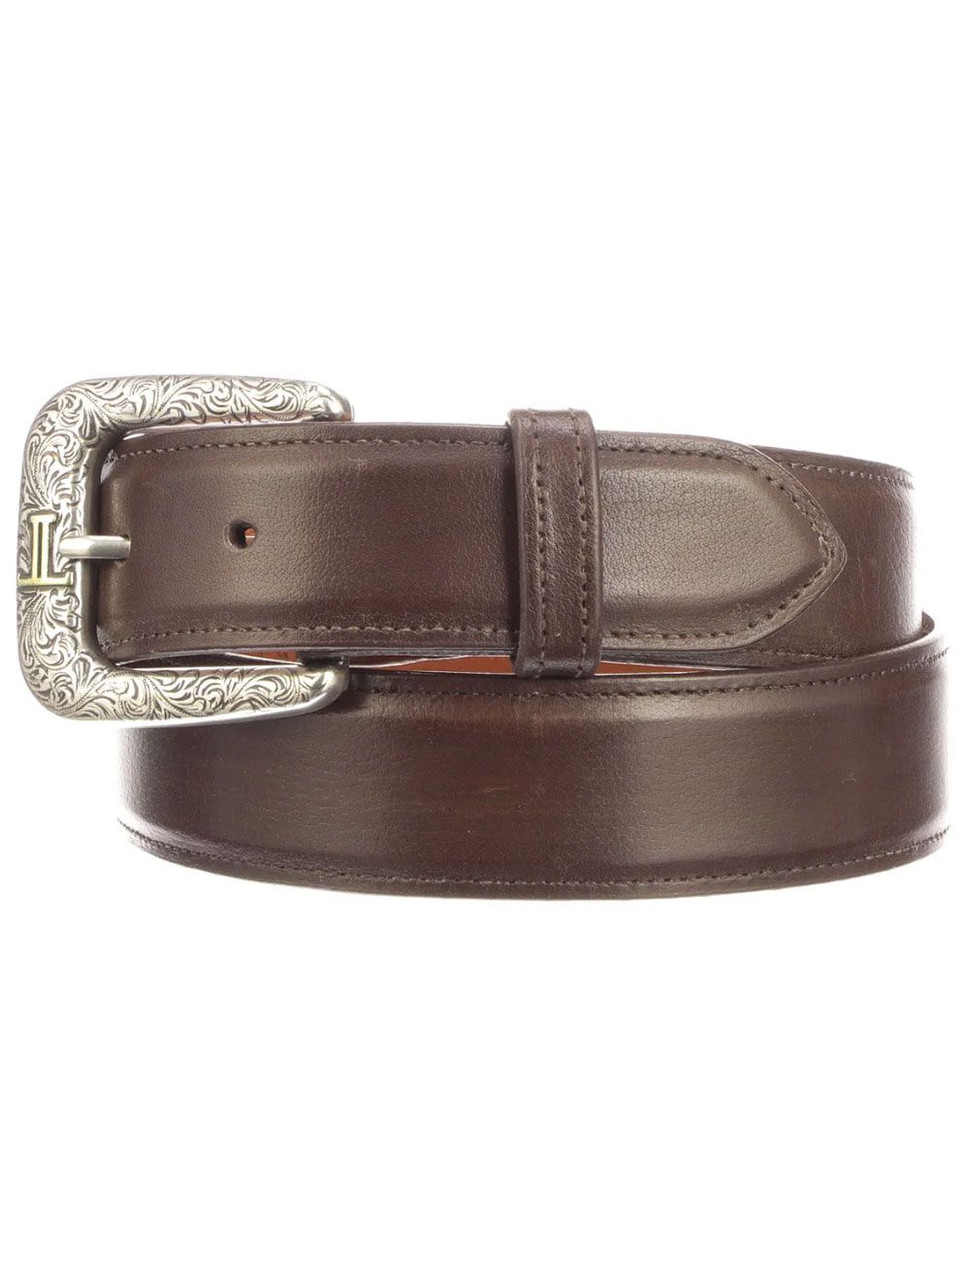 Lucchese Men's Belts - Smooth Baby Buffalo - Whiskey - Billy's Western Wear